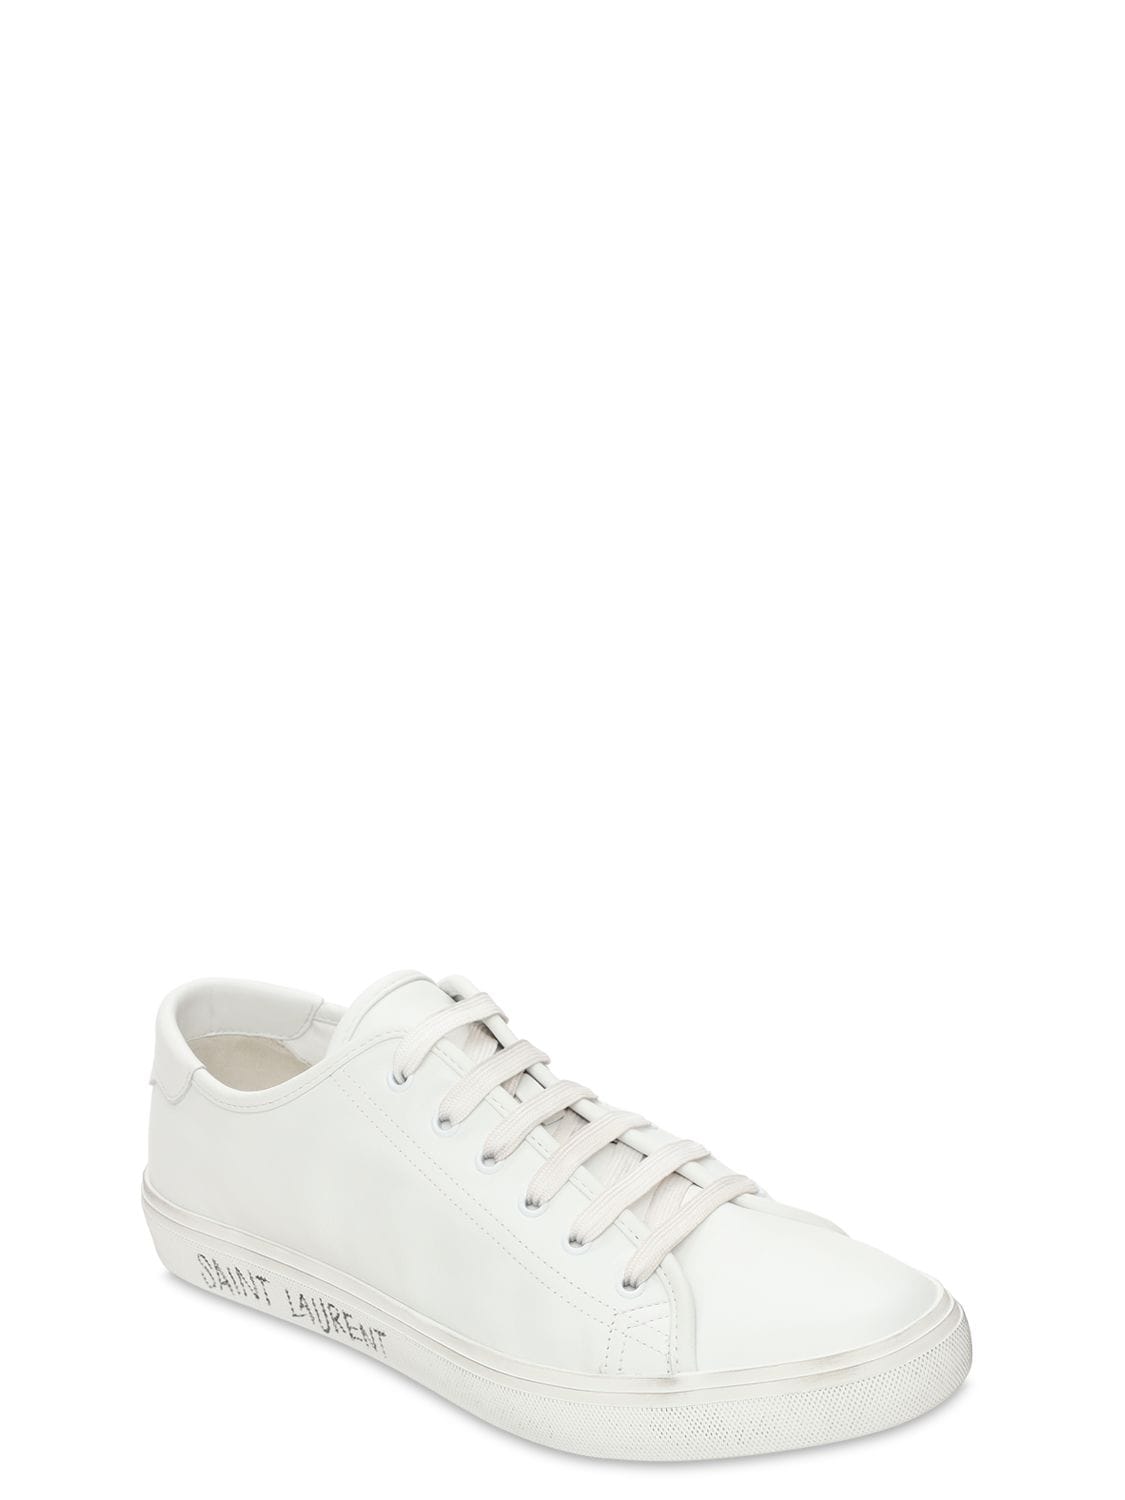 Saint Laurent Malibu Sneakers Smooth Leather In White ModeSens